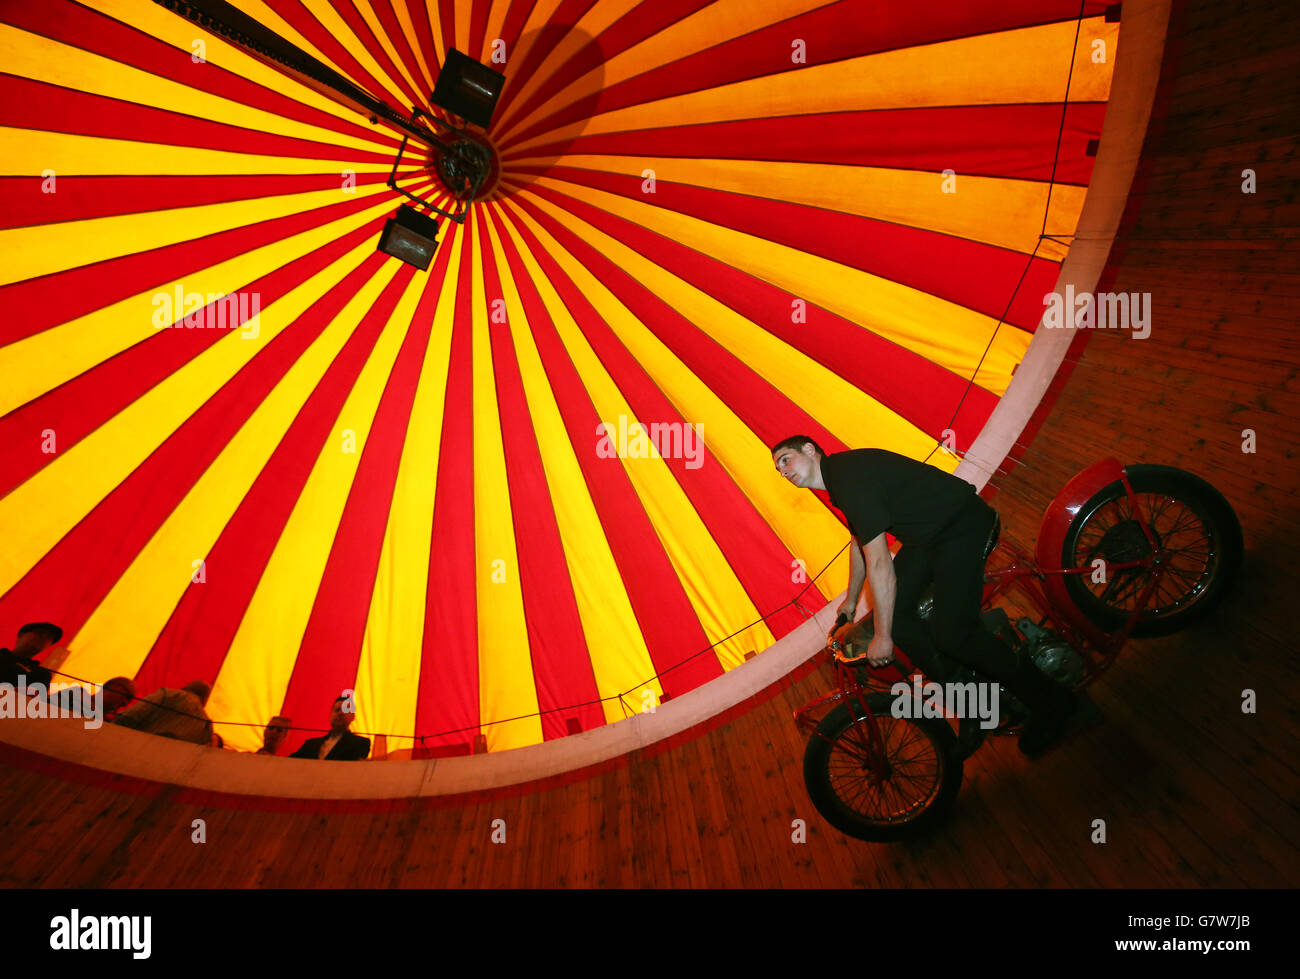 Jake Messham rides the Messham's Wall of Death at the Rua Red arts centre in Tallaght, Dublin, as part of the exhibition A Matter of Life and Death by Stephen Skrynka which celebrates Ireland's famed Wall of Death, as immortalised in the film Eat The Peach. Stock Photo